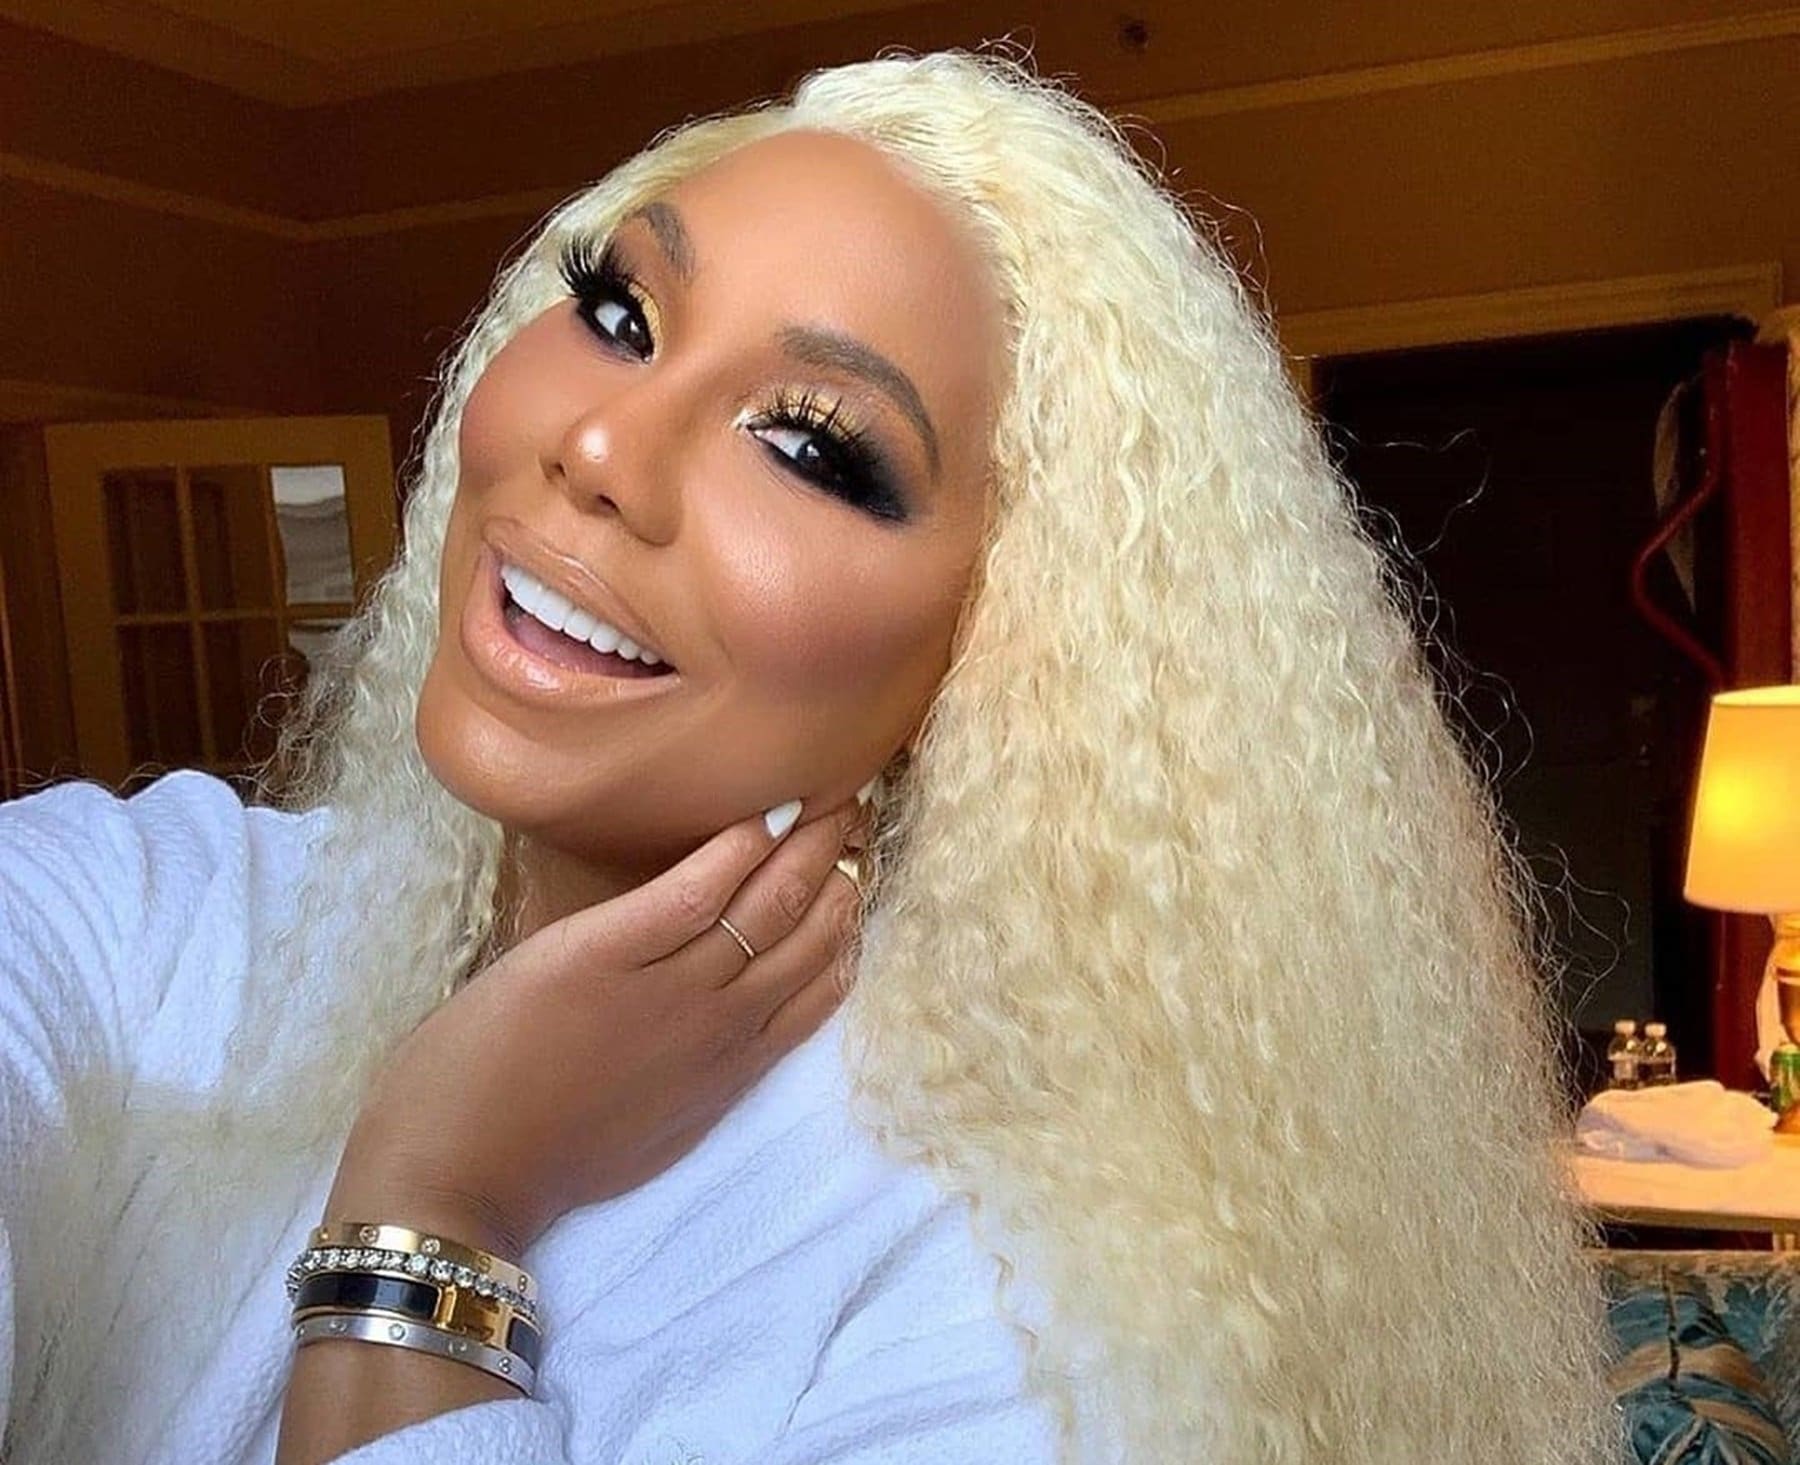 tamar-braxton-enters-the-new-year-with-sultry-pink-bathing-suit-in-latest-video-as-bf-david-adefeso-gets-ready-to-rock-her-world